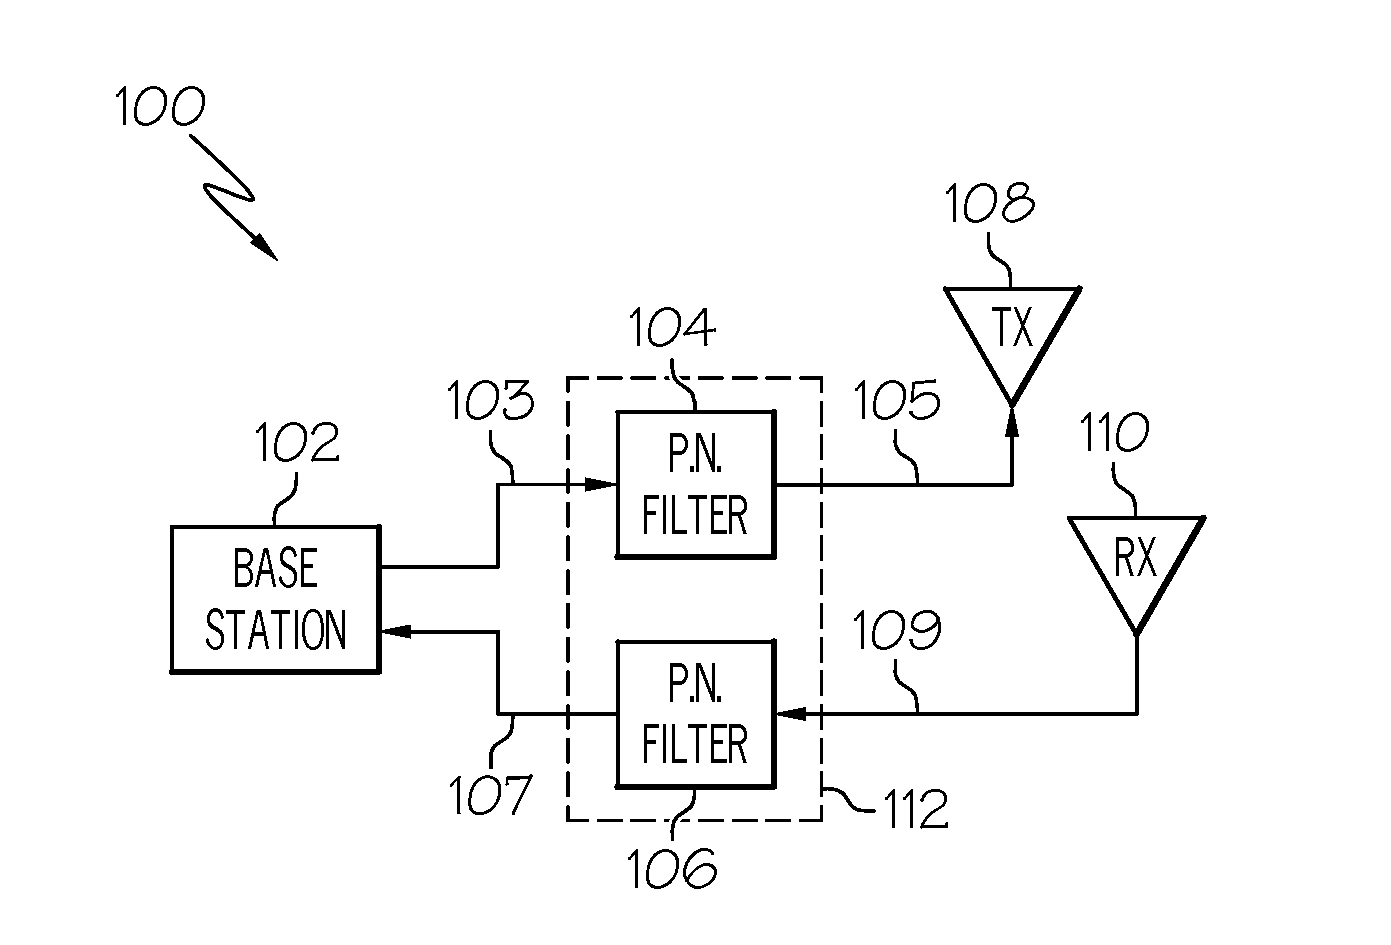 System and method for selectively rejecting frequency bands in wireless communication systems